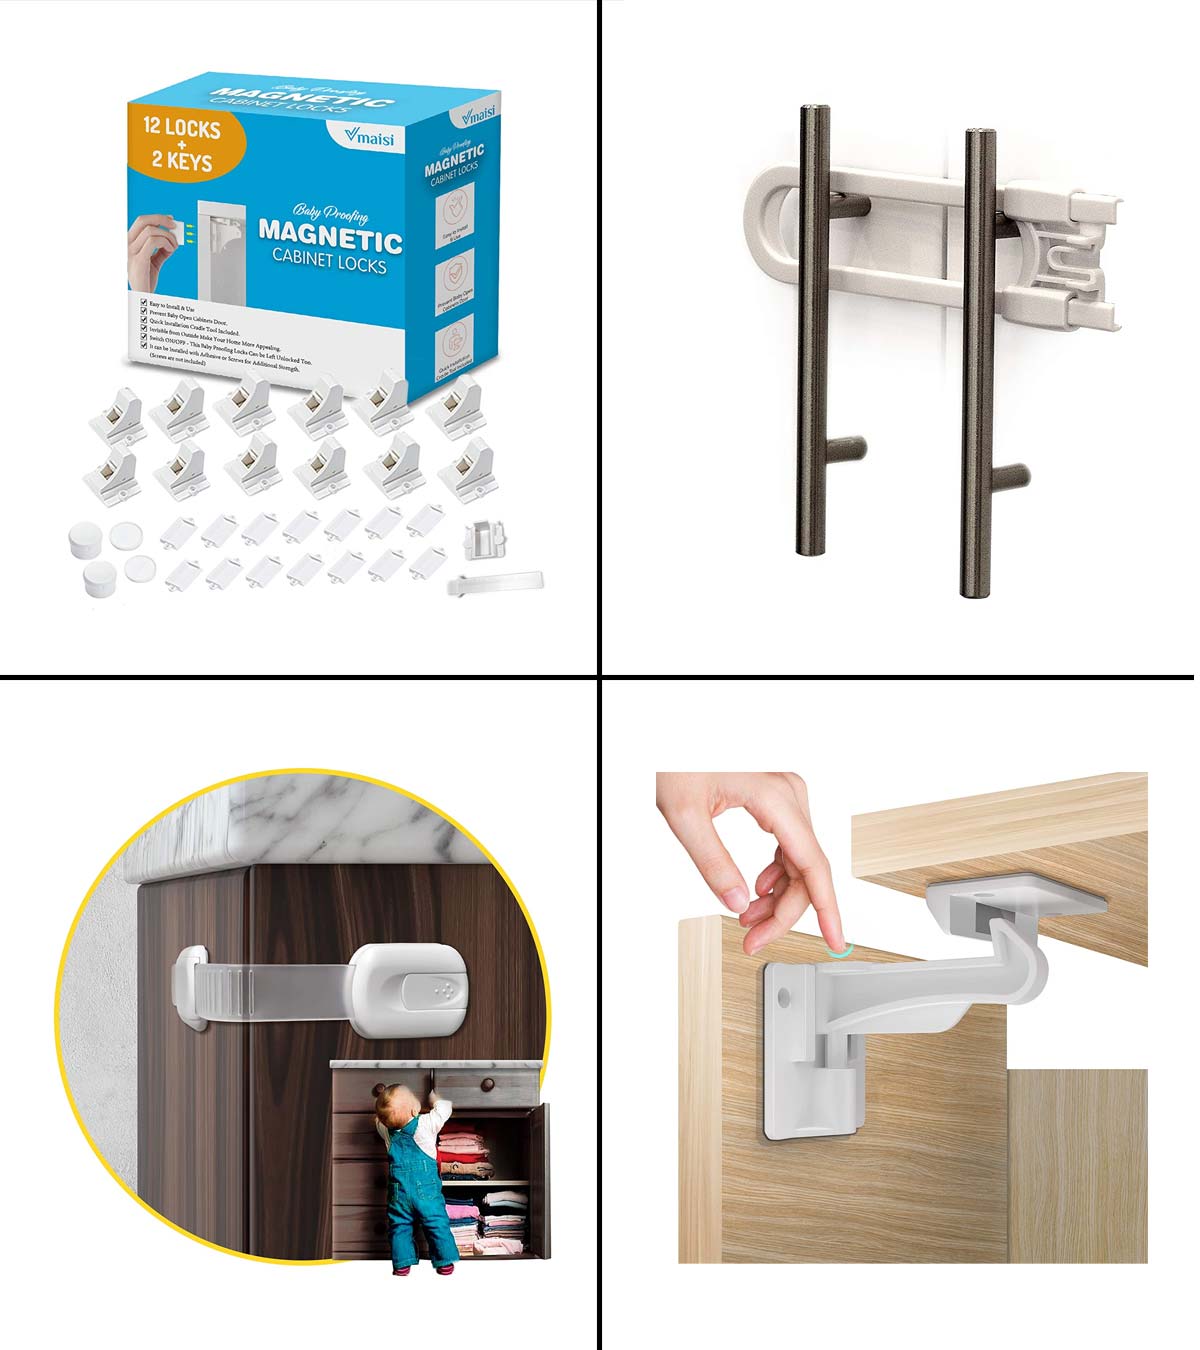 Baby Child Proof Safety Cupboard Cabinet Locks /Latch by Baybee Beu 